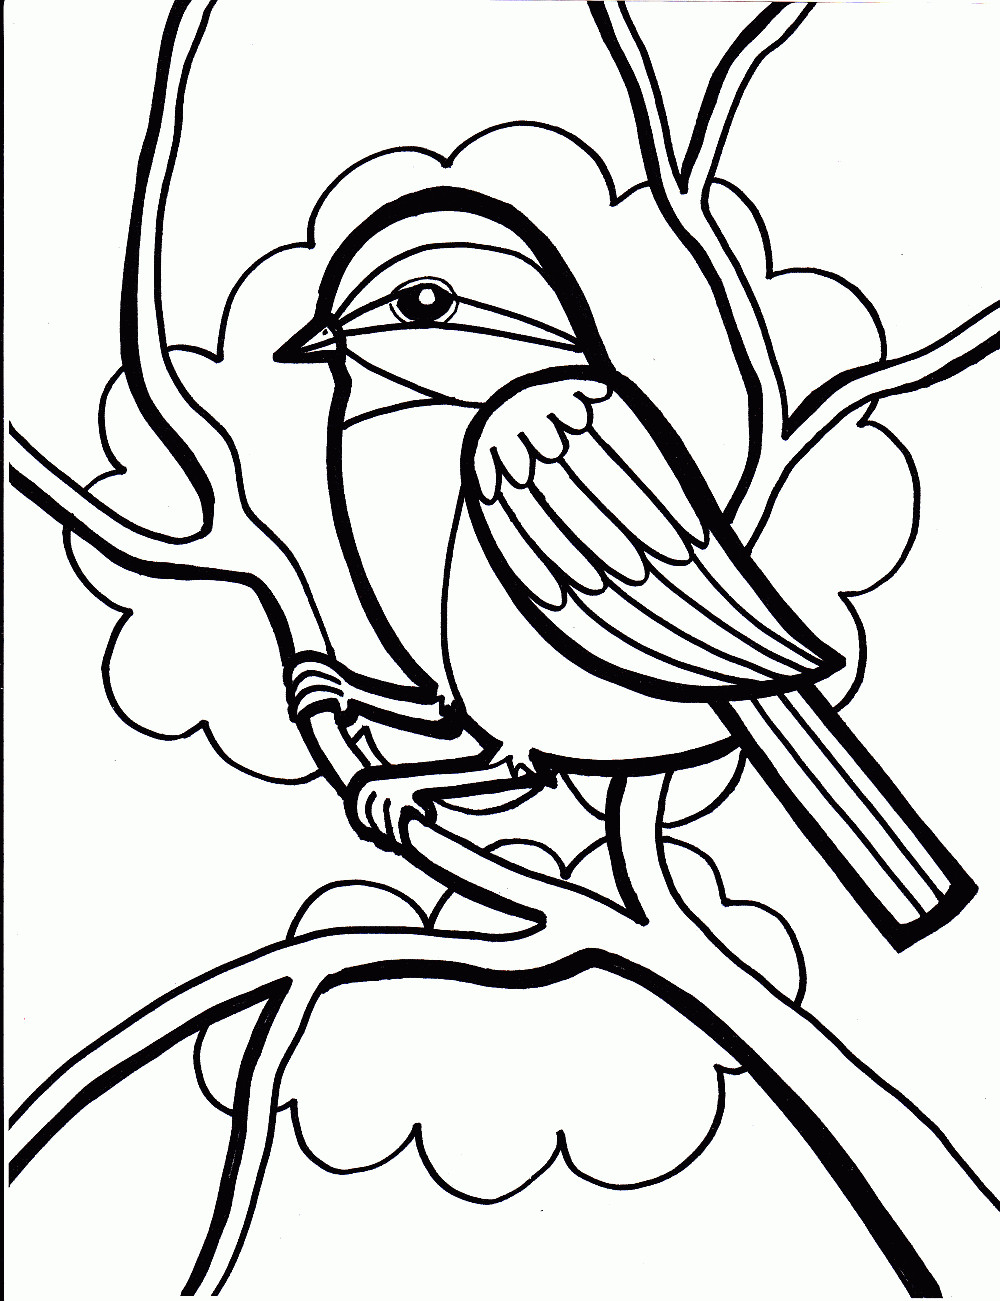 Printable Coloring Pages For Kids
 Coloring Now Blog Archive Free Coloring Pages for Kids